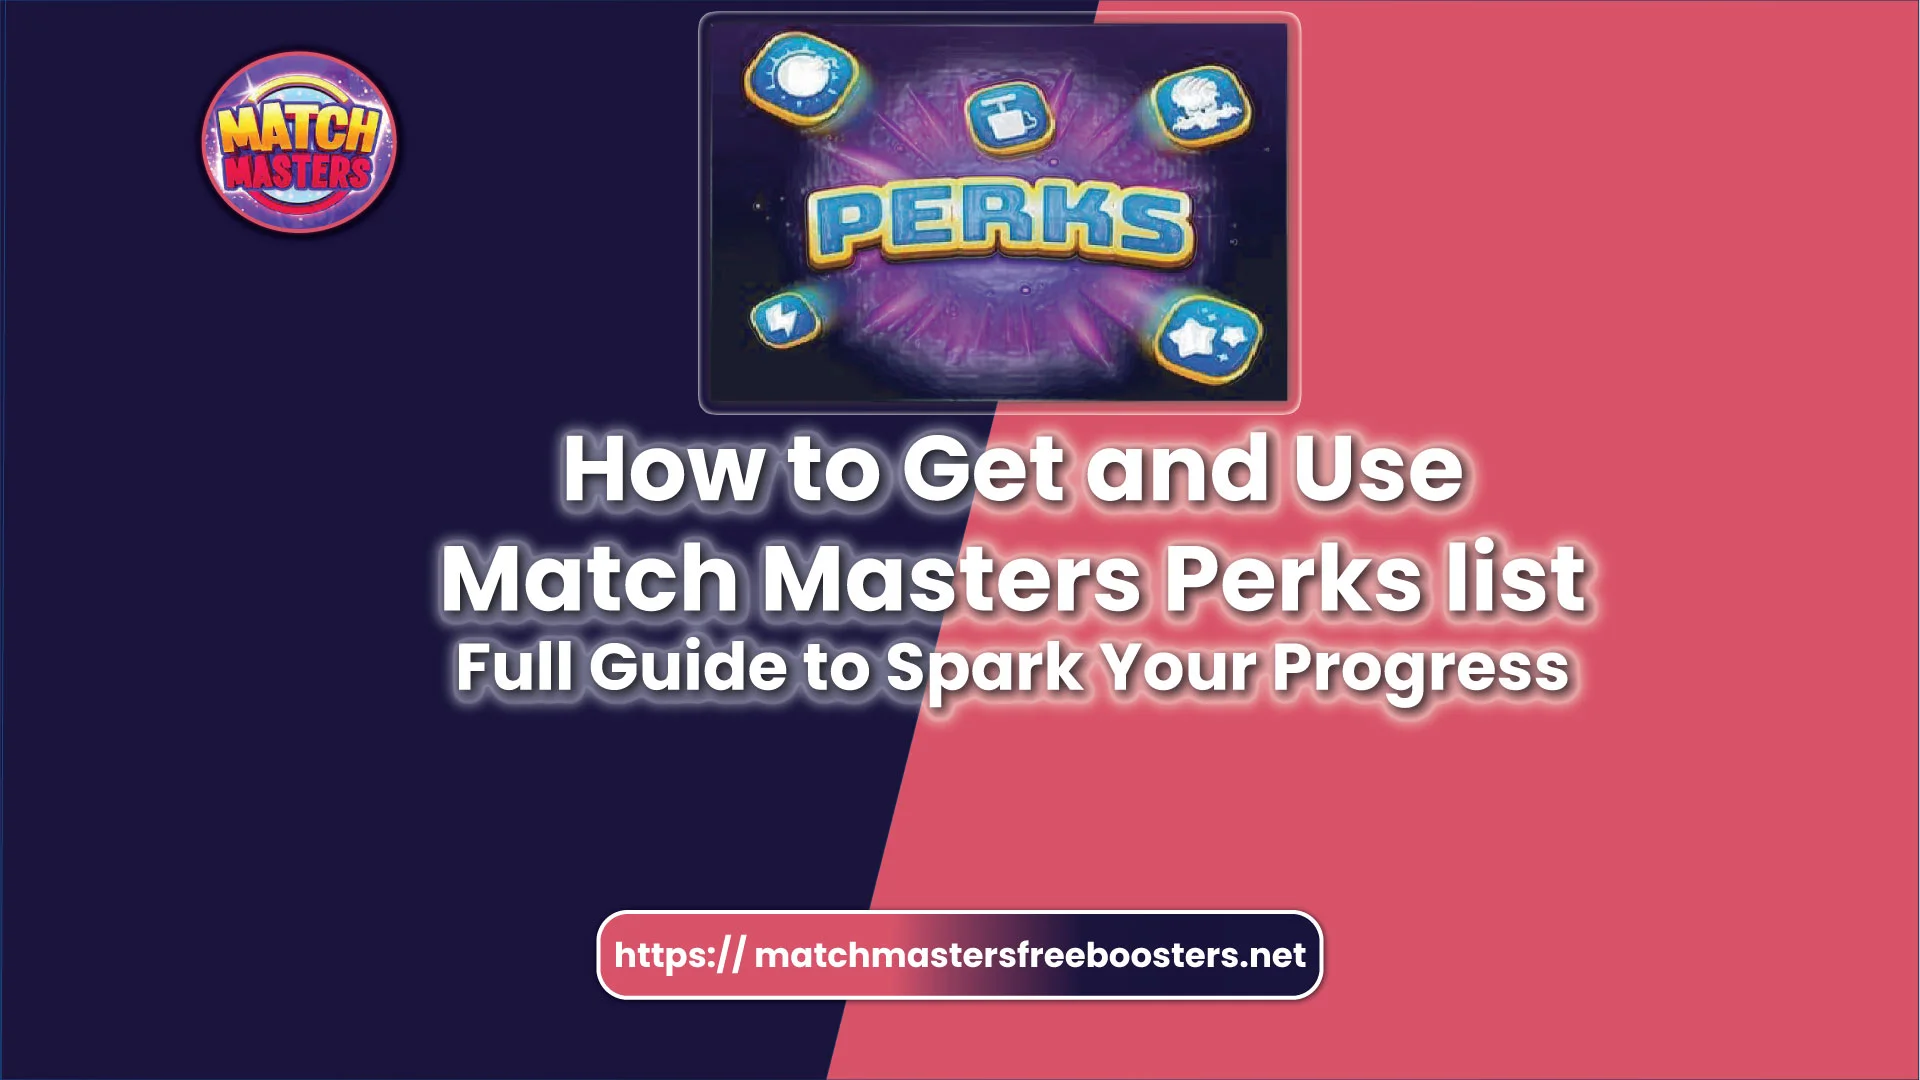 How to Get and Use Match Masters Perks